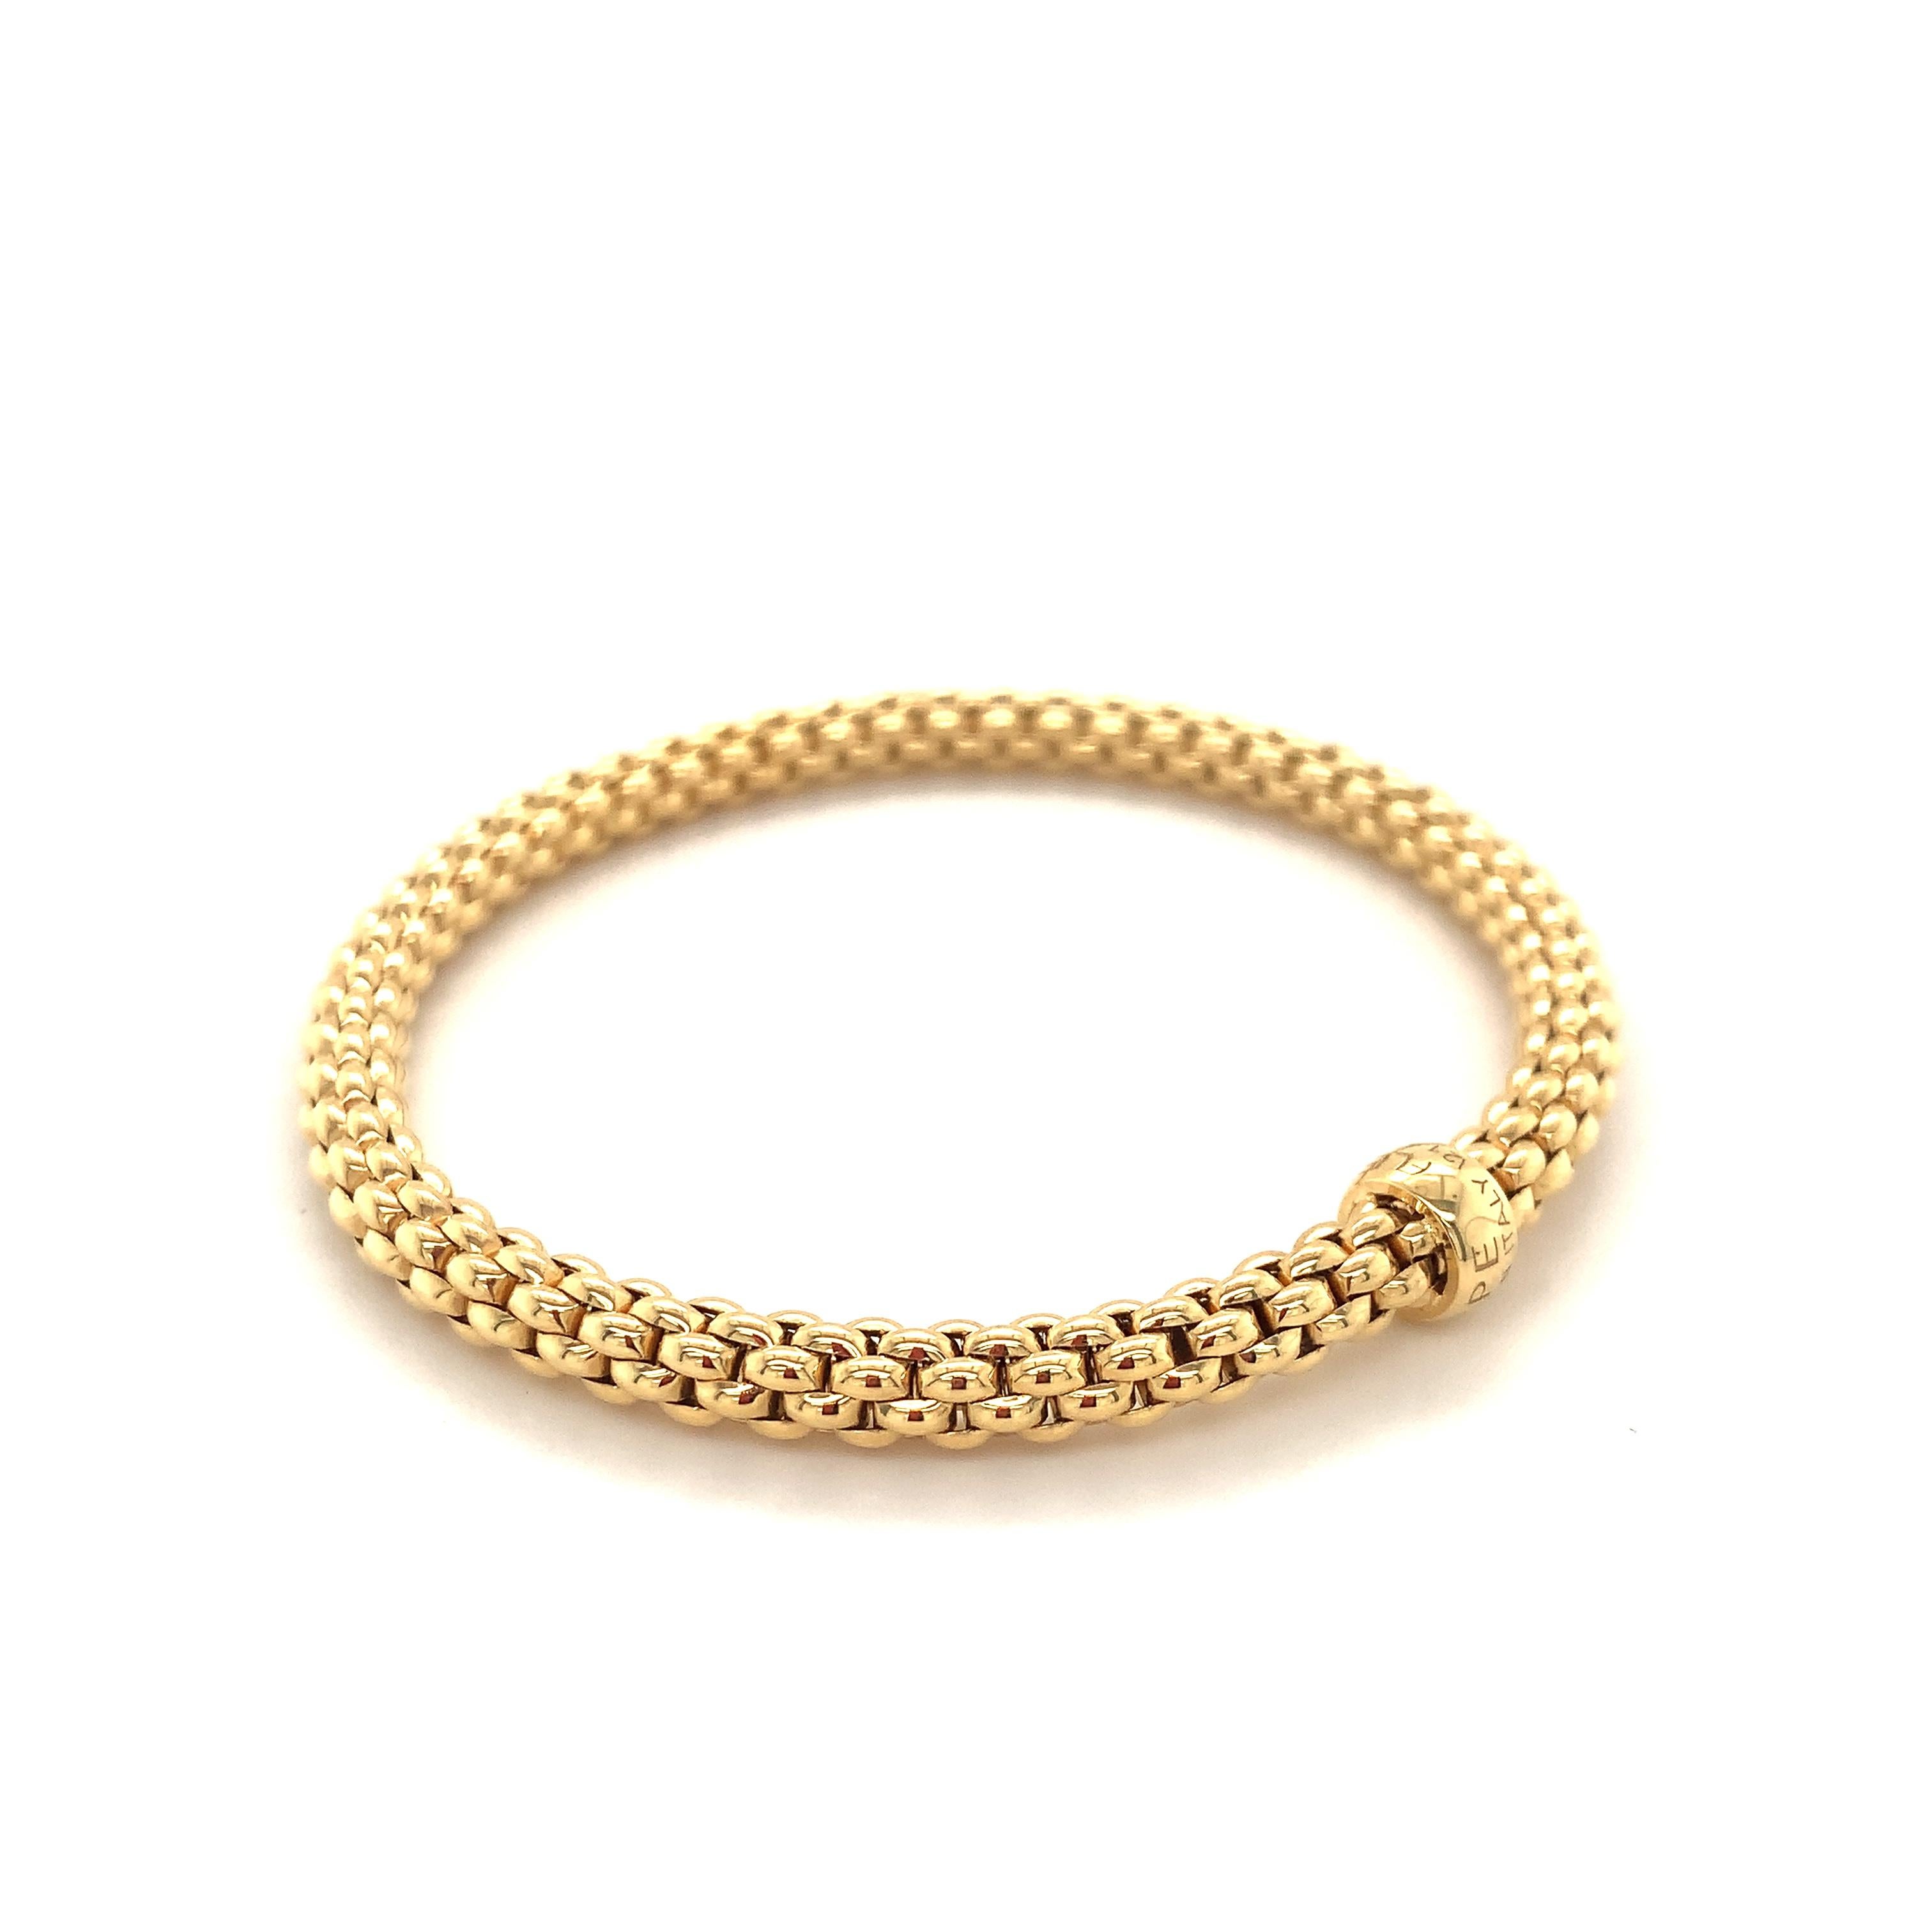 Fope Bracelet 18K Yellow Gold with Solid Gold Rondel 620BM-G 8